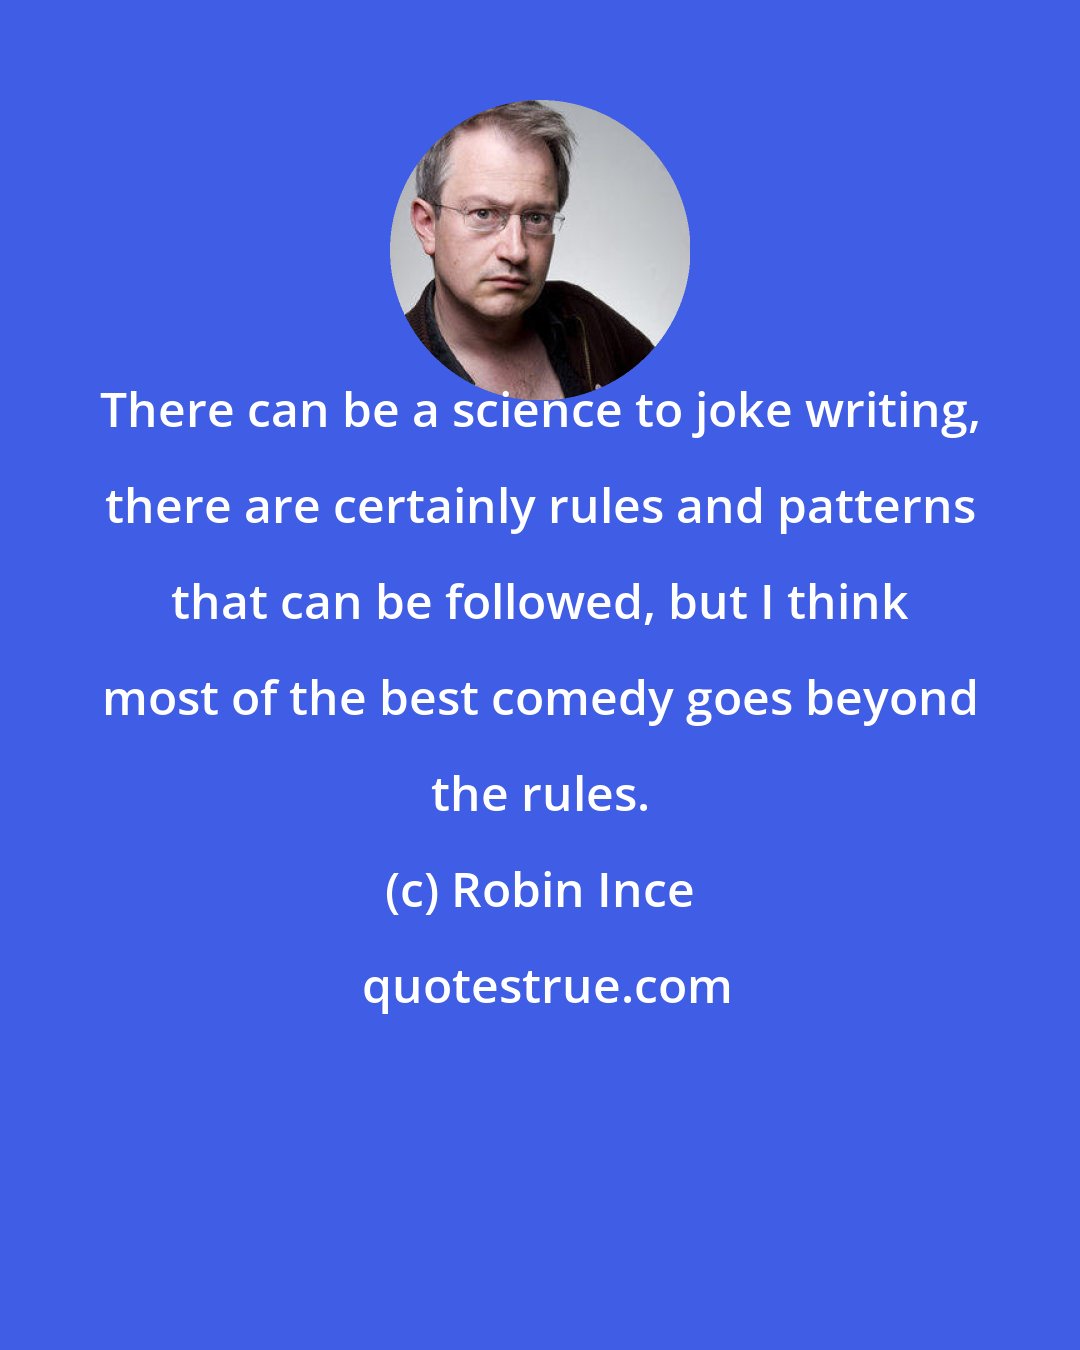 Robin Ince: There can be a science to joke writing, there are certainly rules and patterns that can be followed, but I think most of the best comedy goes beyond the rules.